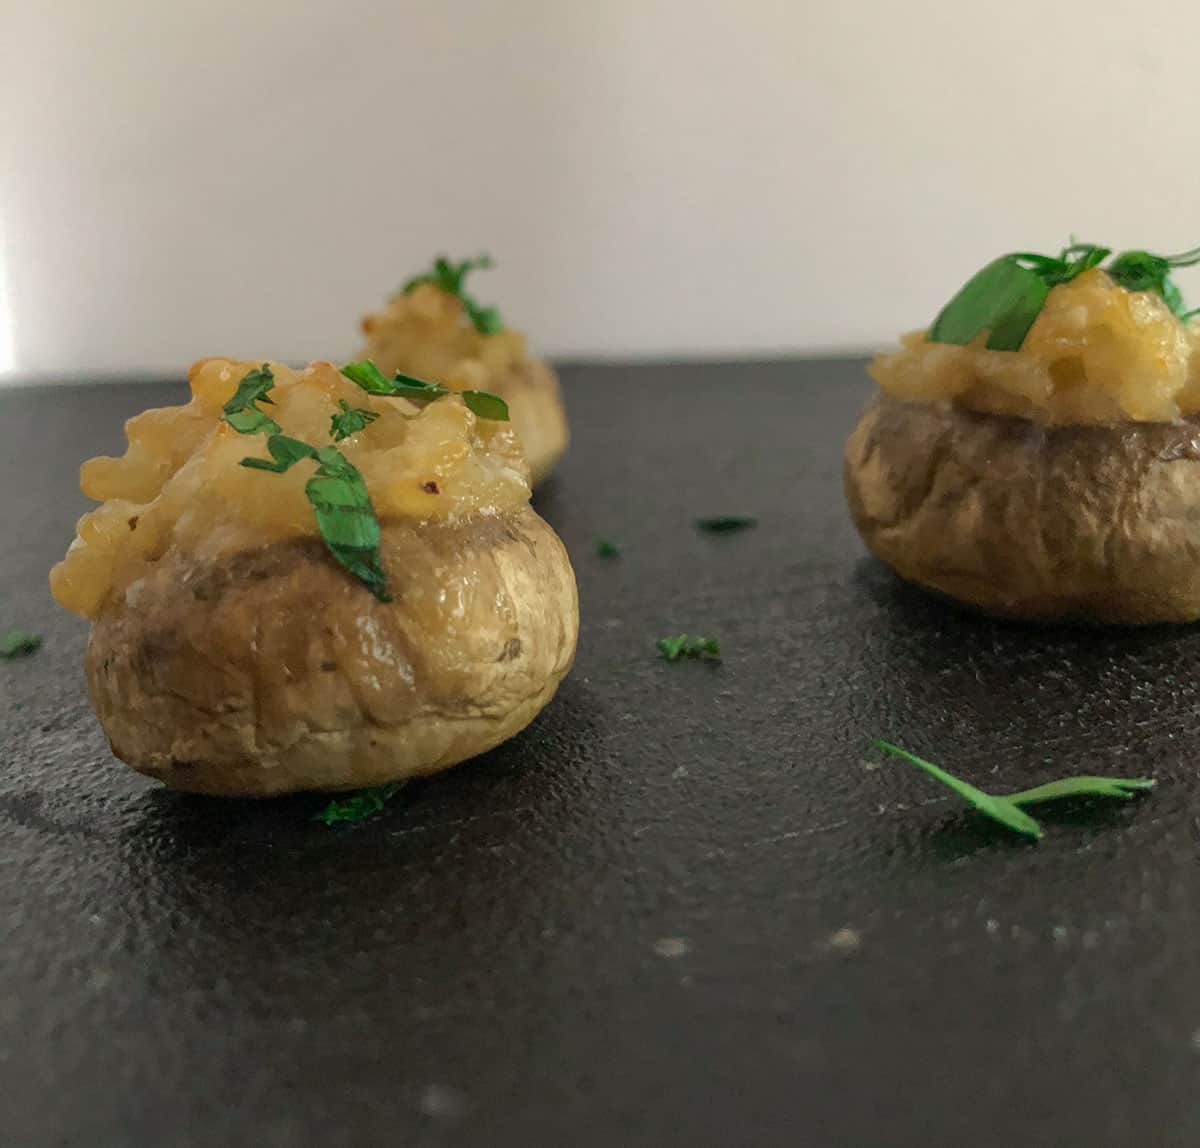 Mushroom filled with risotto and topped with parsley.